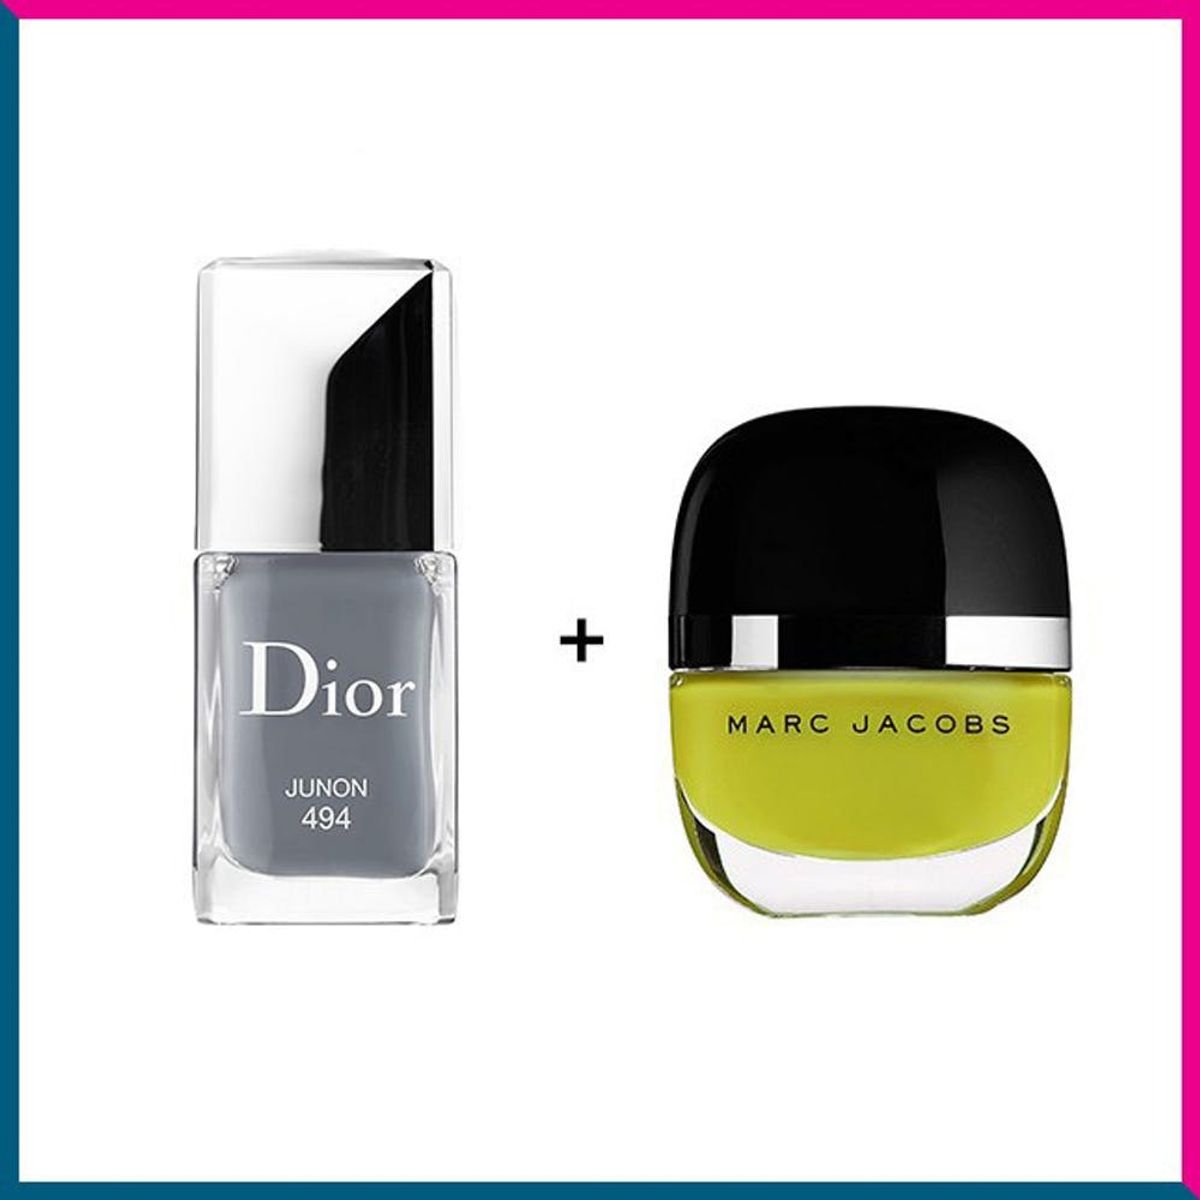 10 Unexpected Nail Polish Color Combos to Try Now